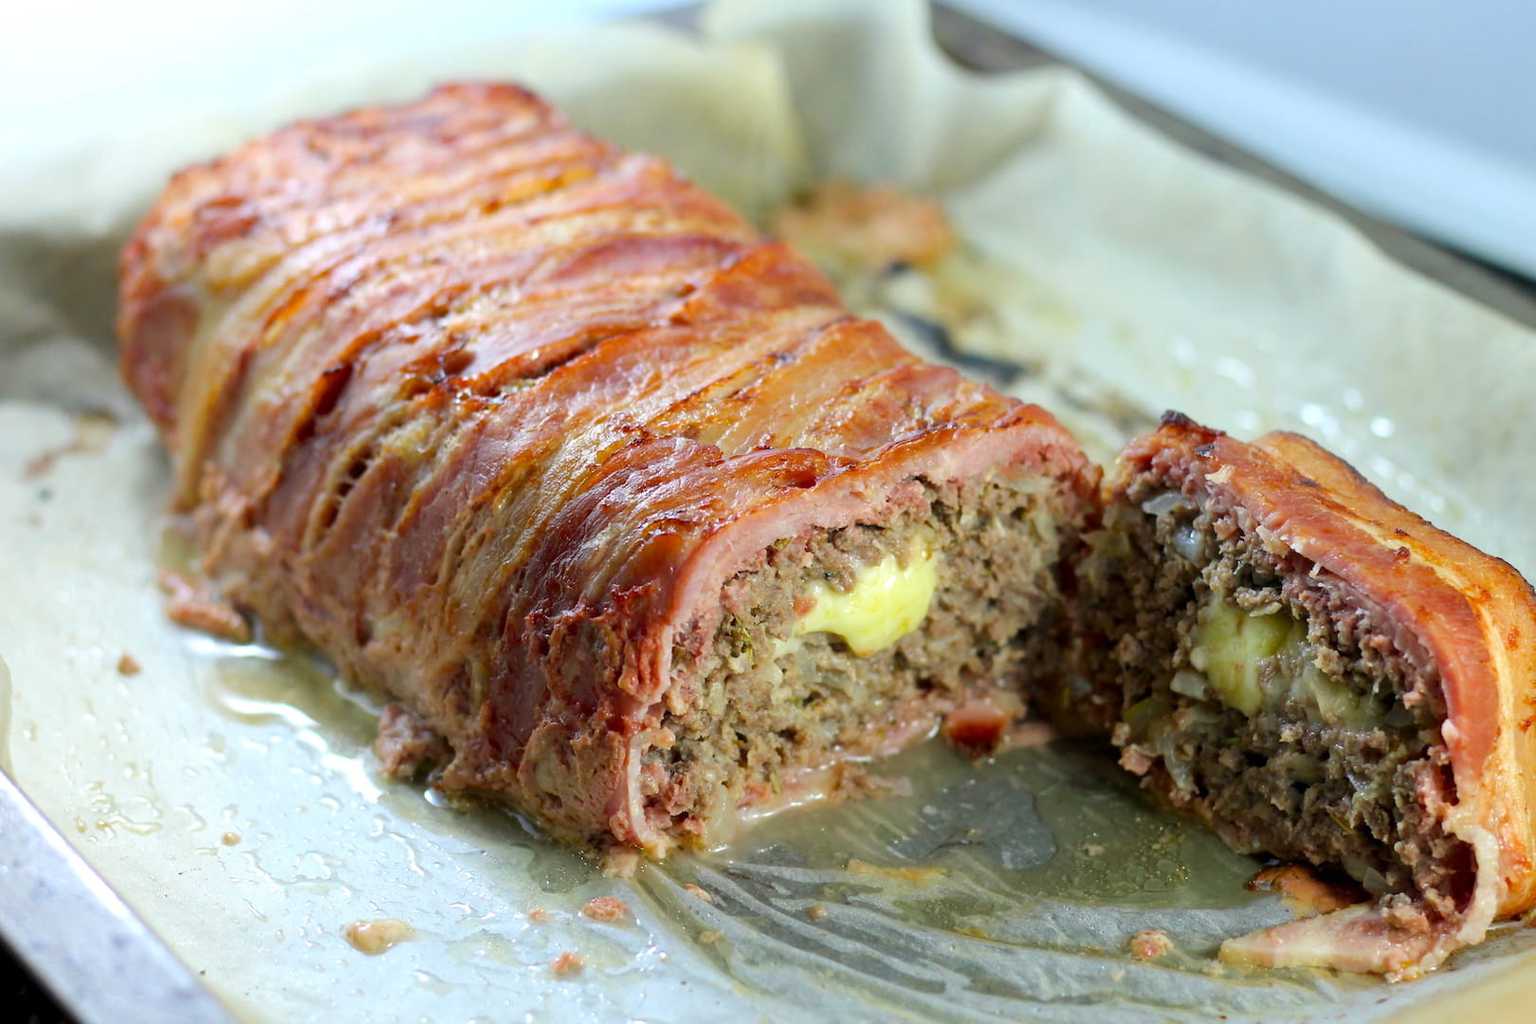 Keto Meatloaf – Bacon Wrapped and Cheese Stuffed recipe by Aussie Keto Queen. Keto Meatloaf, Keto Bacon Meatloaf, Keto Cheese stuffed meatloaf